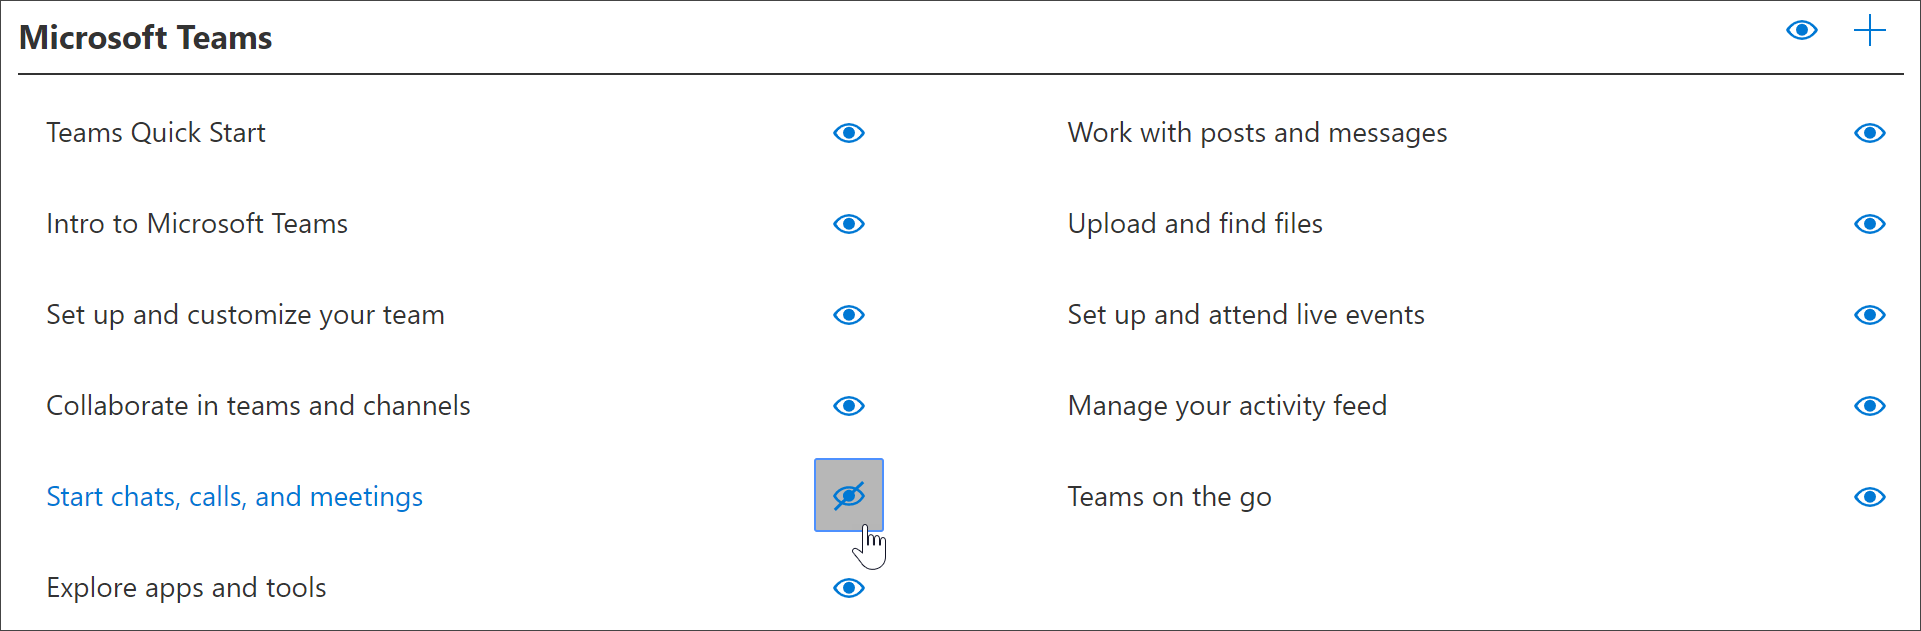 Browser tab showing the Get Started with Office 365 page